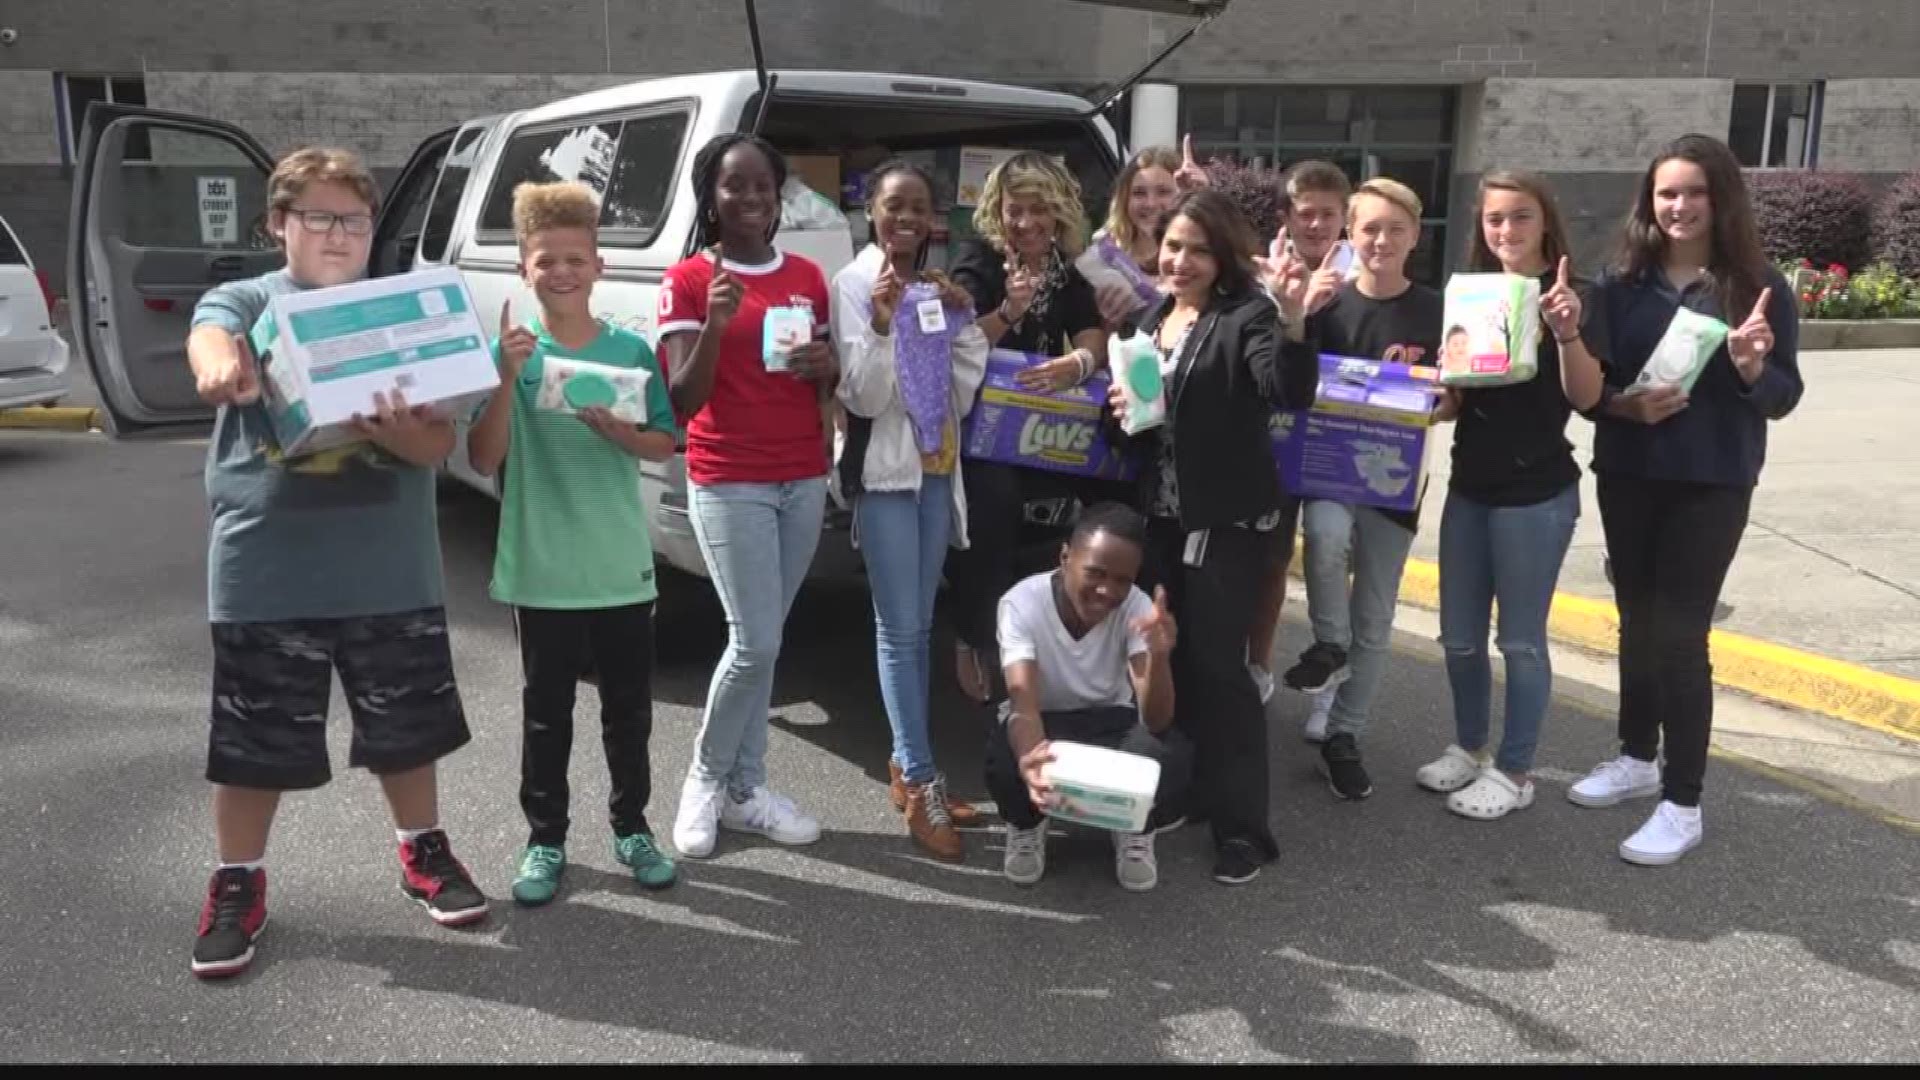 Students at Gildersleeve Middle school in Newport News filled an entire truck with onesies, pampers and diapers for baby victims of hurricane Harvey